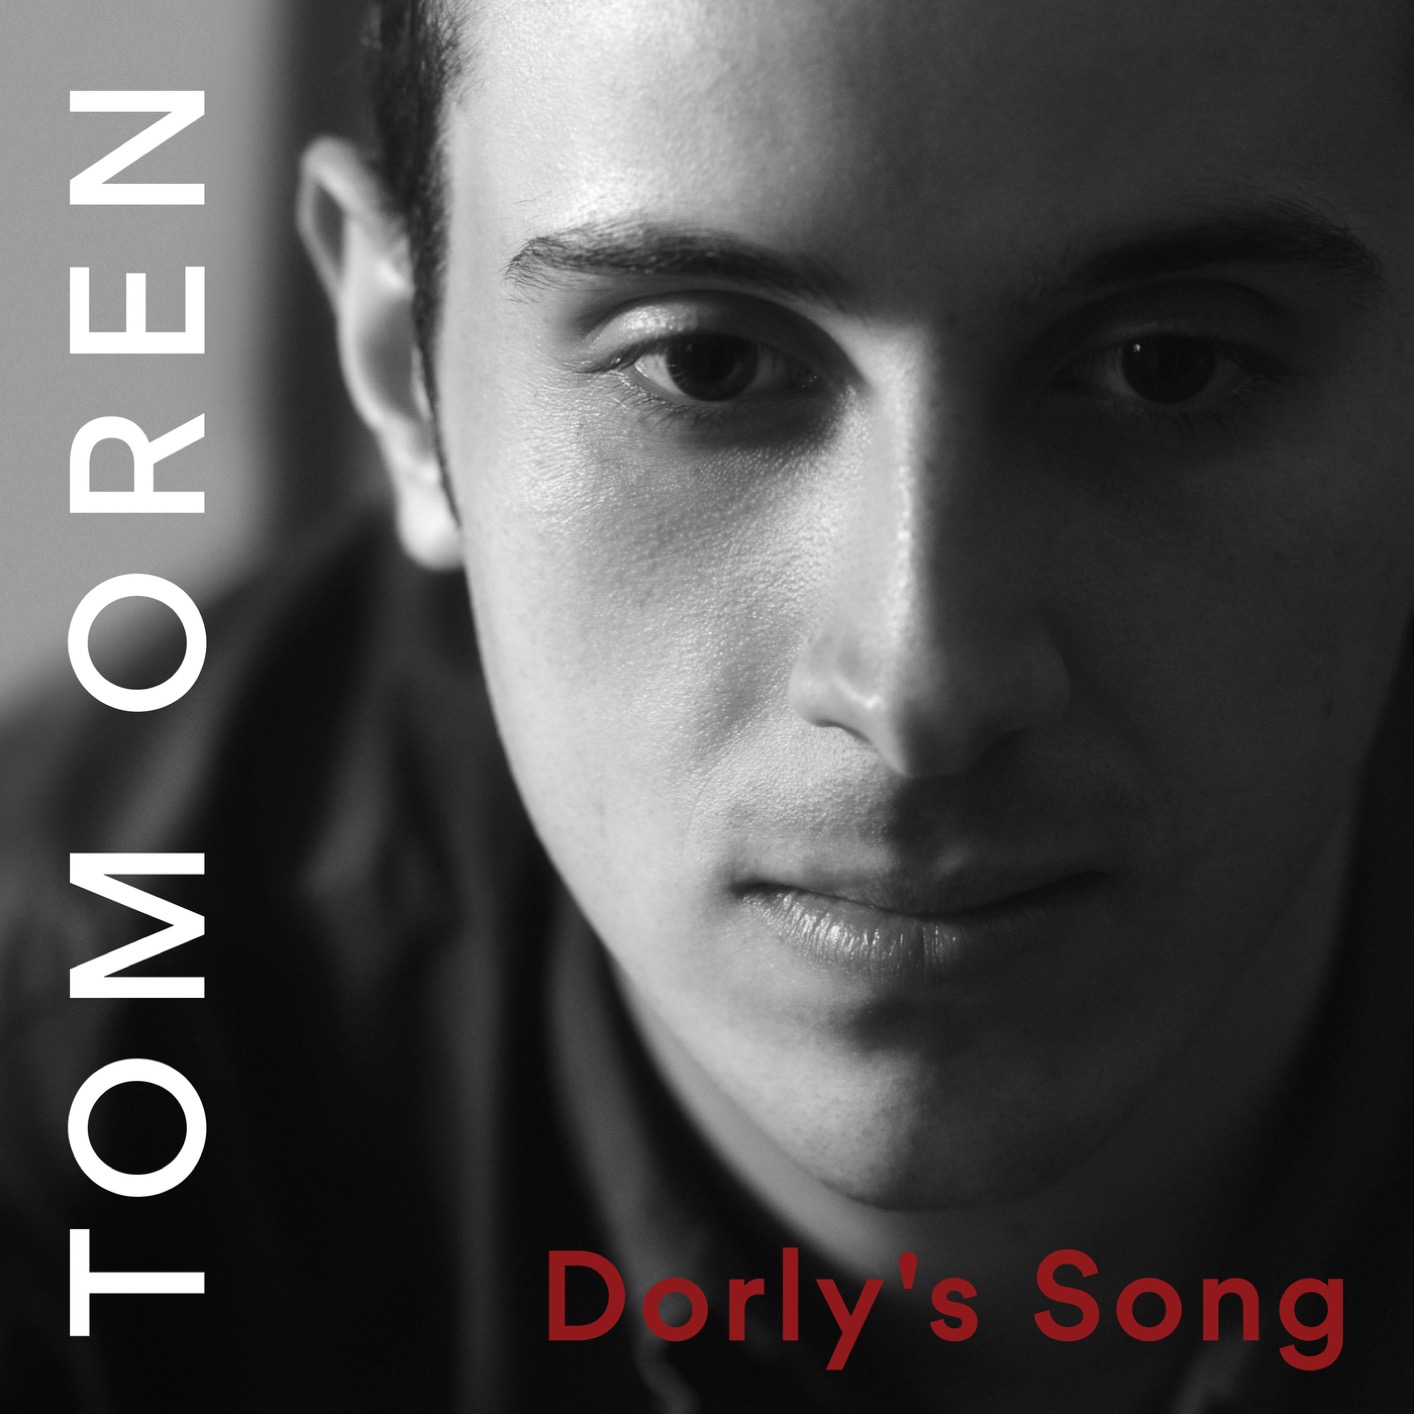 Featured Image for “Dorly’s Song”